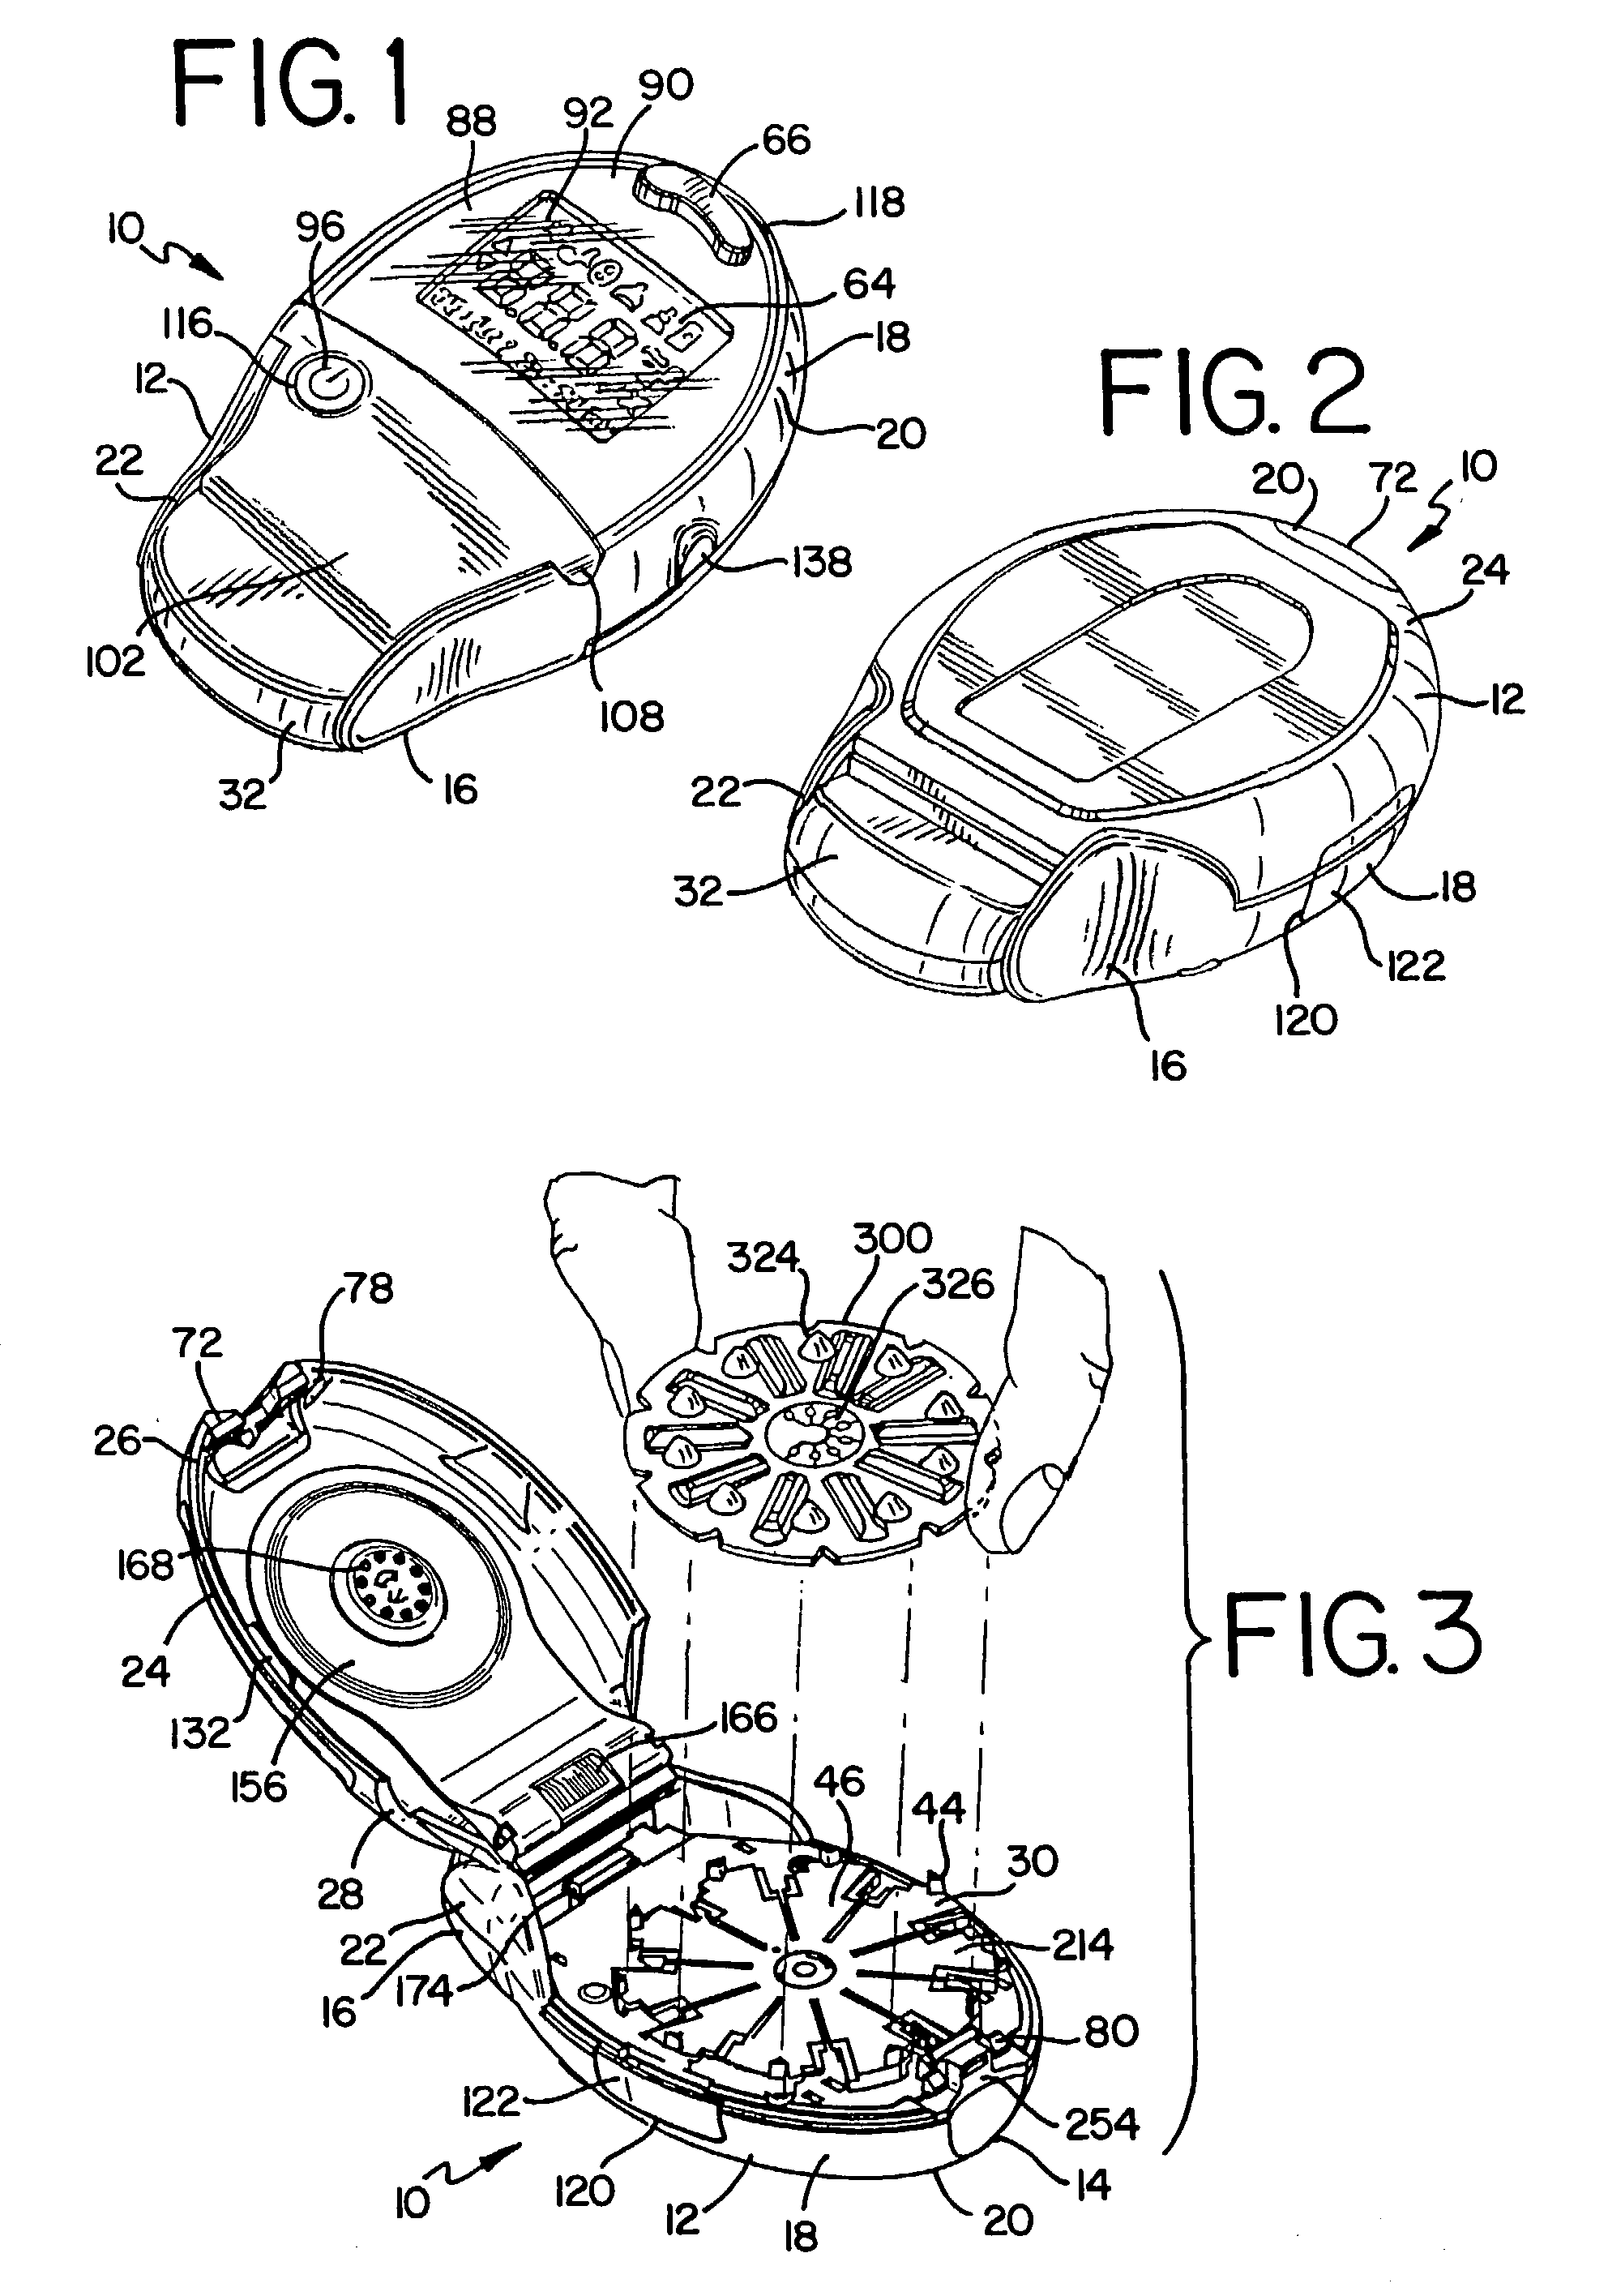 Sensor dispensing instrument having an activation mechanism and methods of using the same